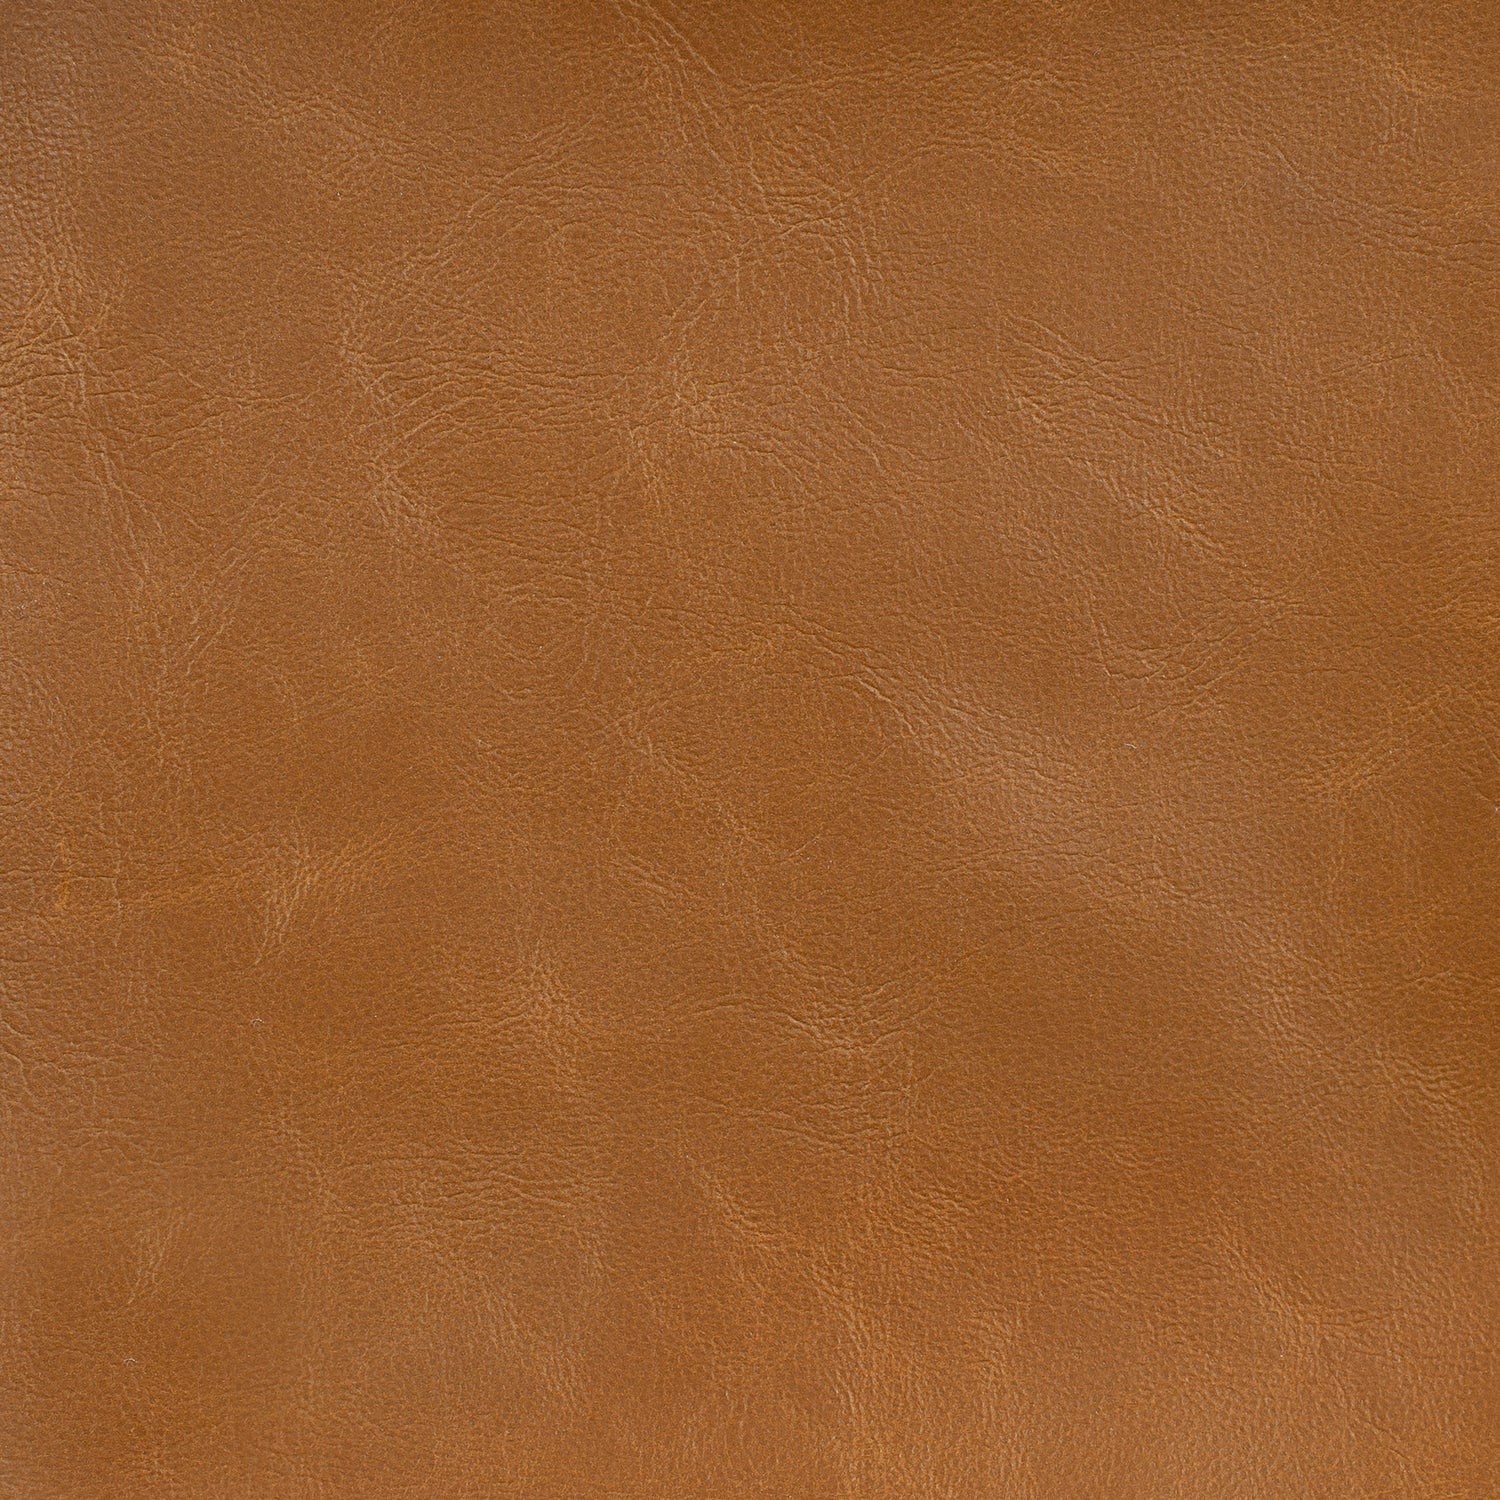 Italian Tanned Leather Swatches Vegan Leather Tan